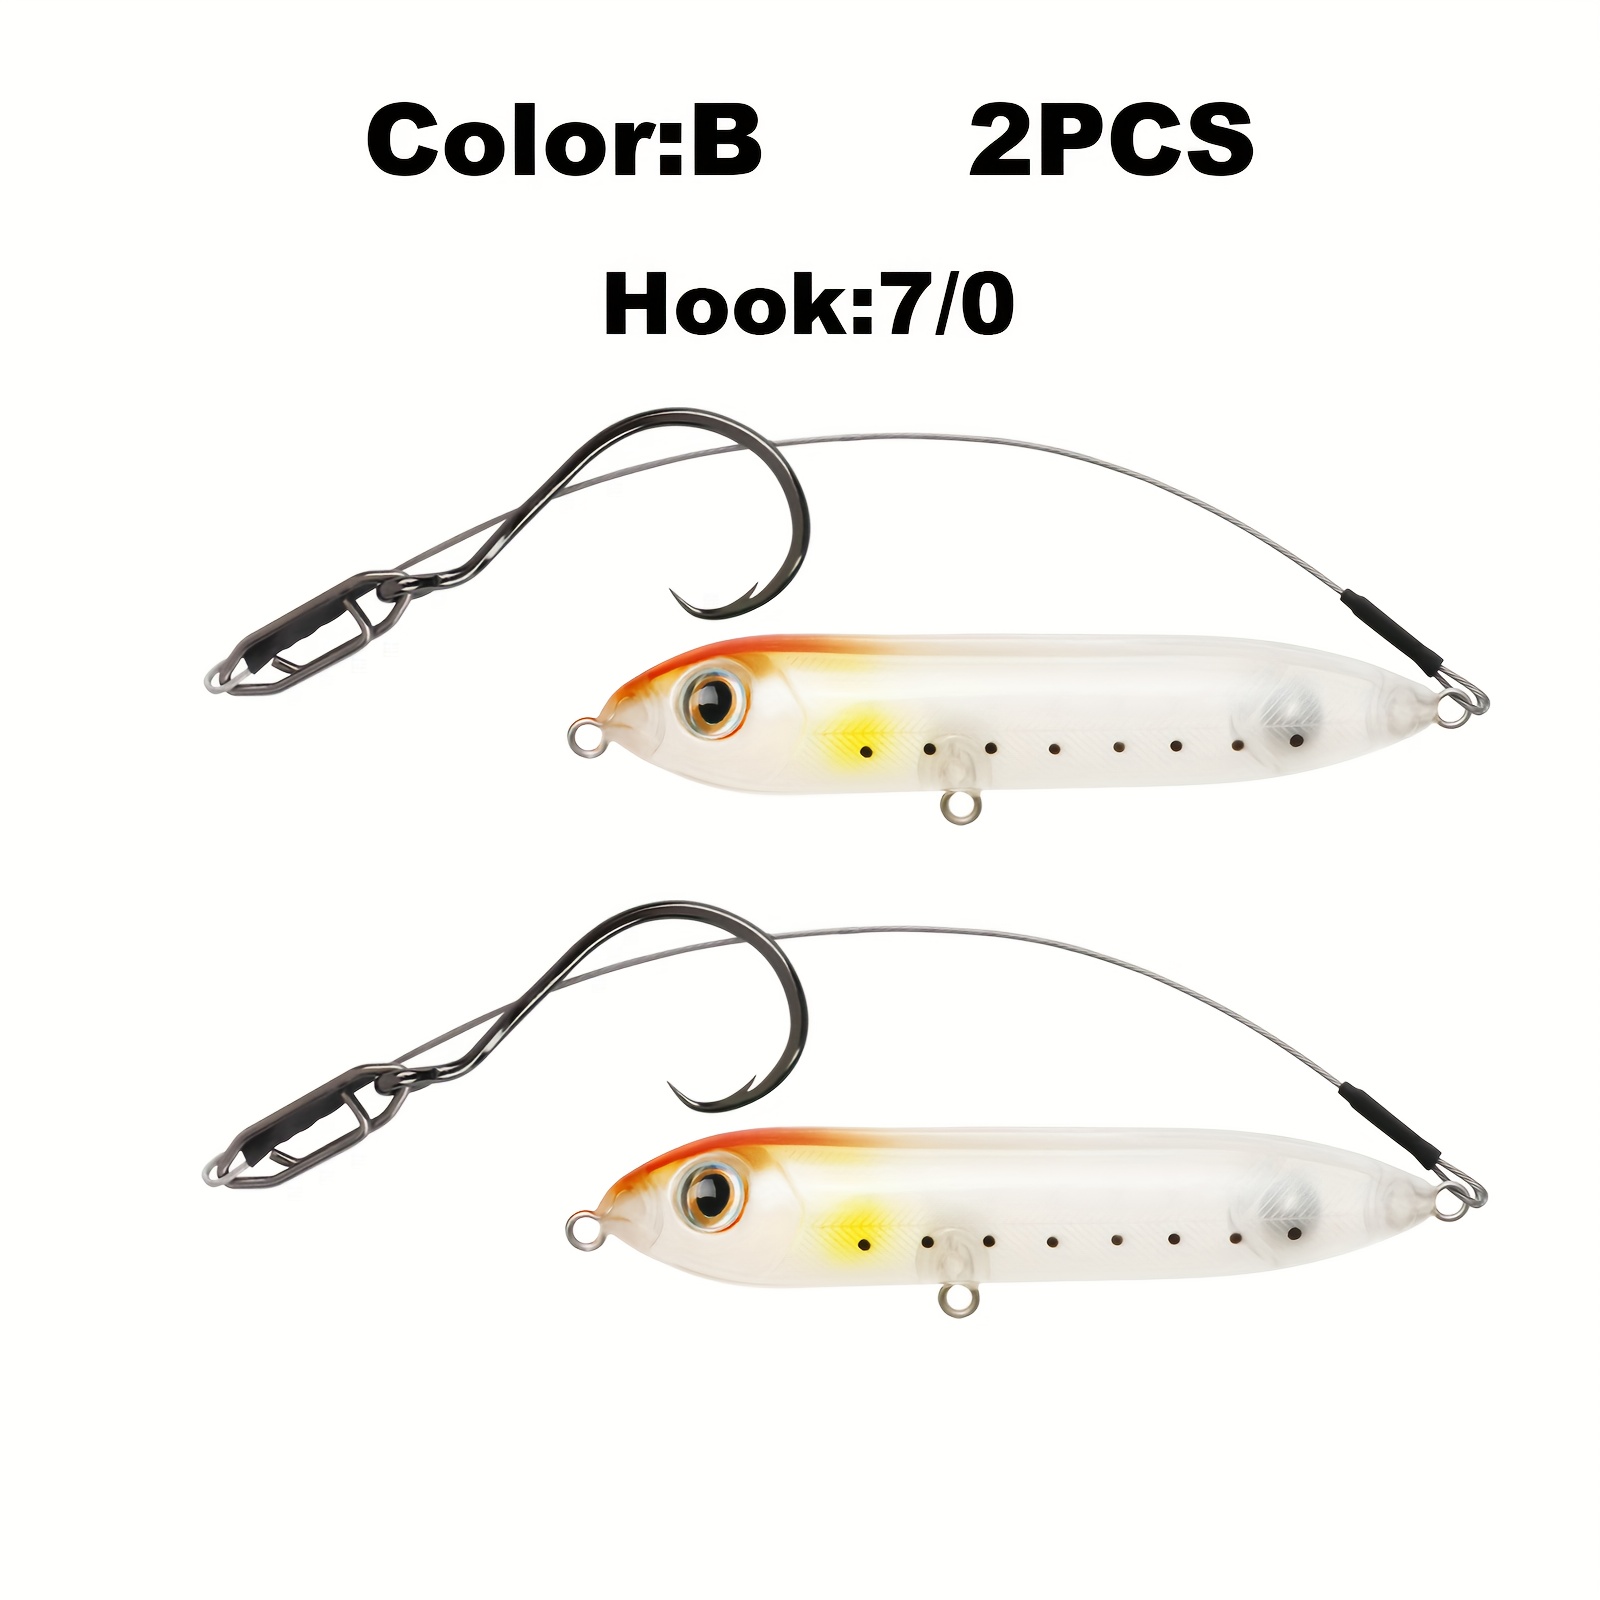  BUBBLE FISHING Catfish Floats Santee Cooper Catfishing Rig  Catfishing Equipment Combo for Bank River Lake with Circle Hooks Black&red  (Pack of 4) : Sports & Outdoors